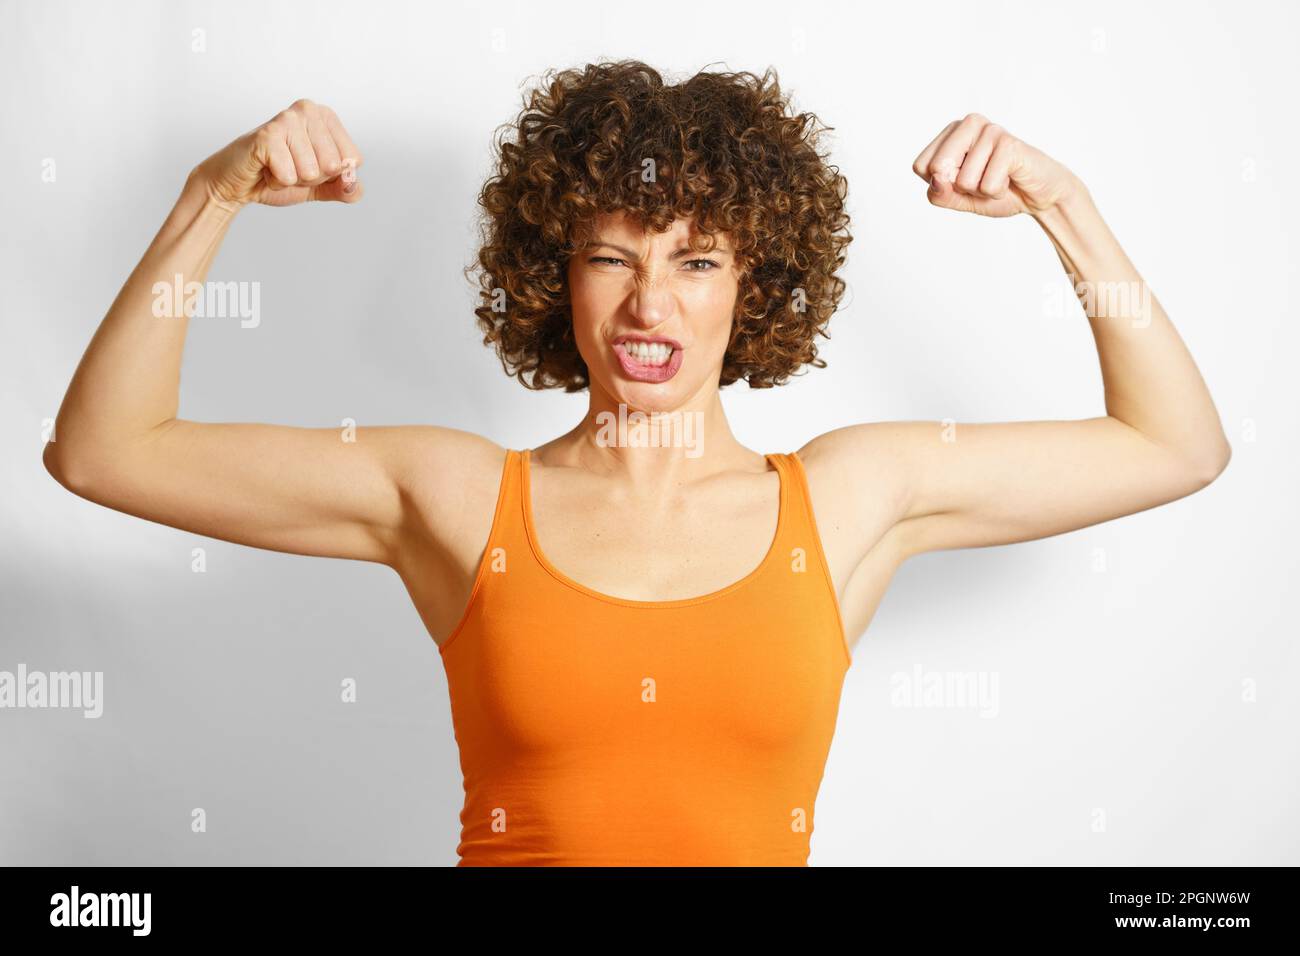 Woman flexing muscles against white background Stock Photo